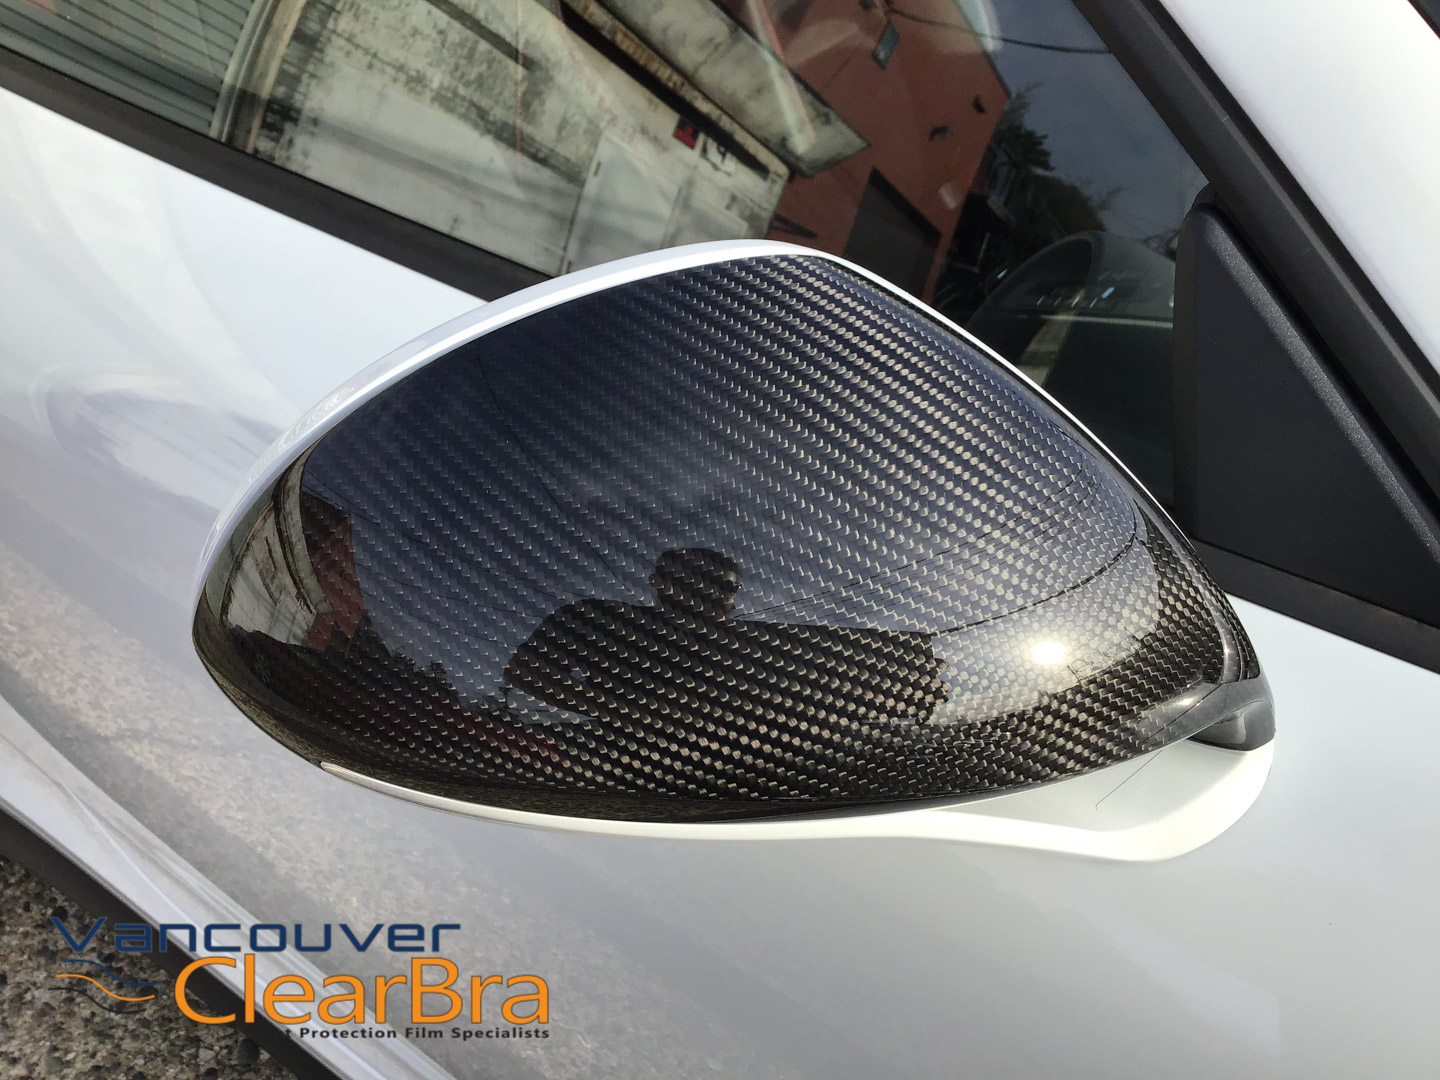 Protect your Carbon Fiber - Vancouver ClearBra